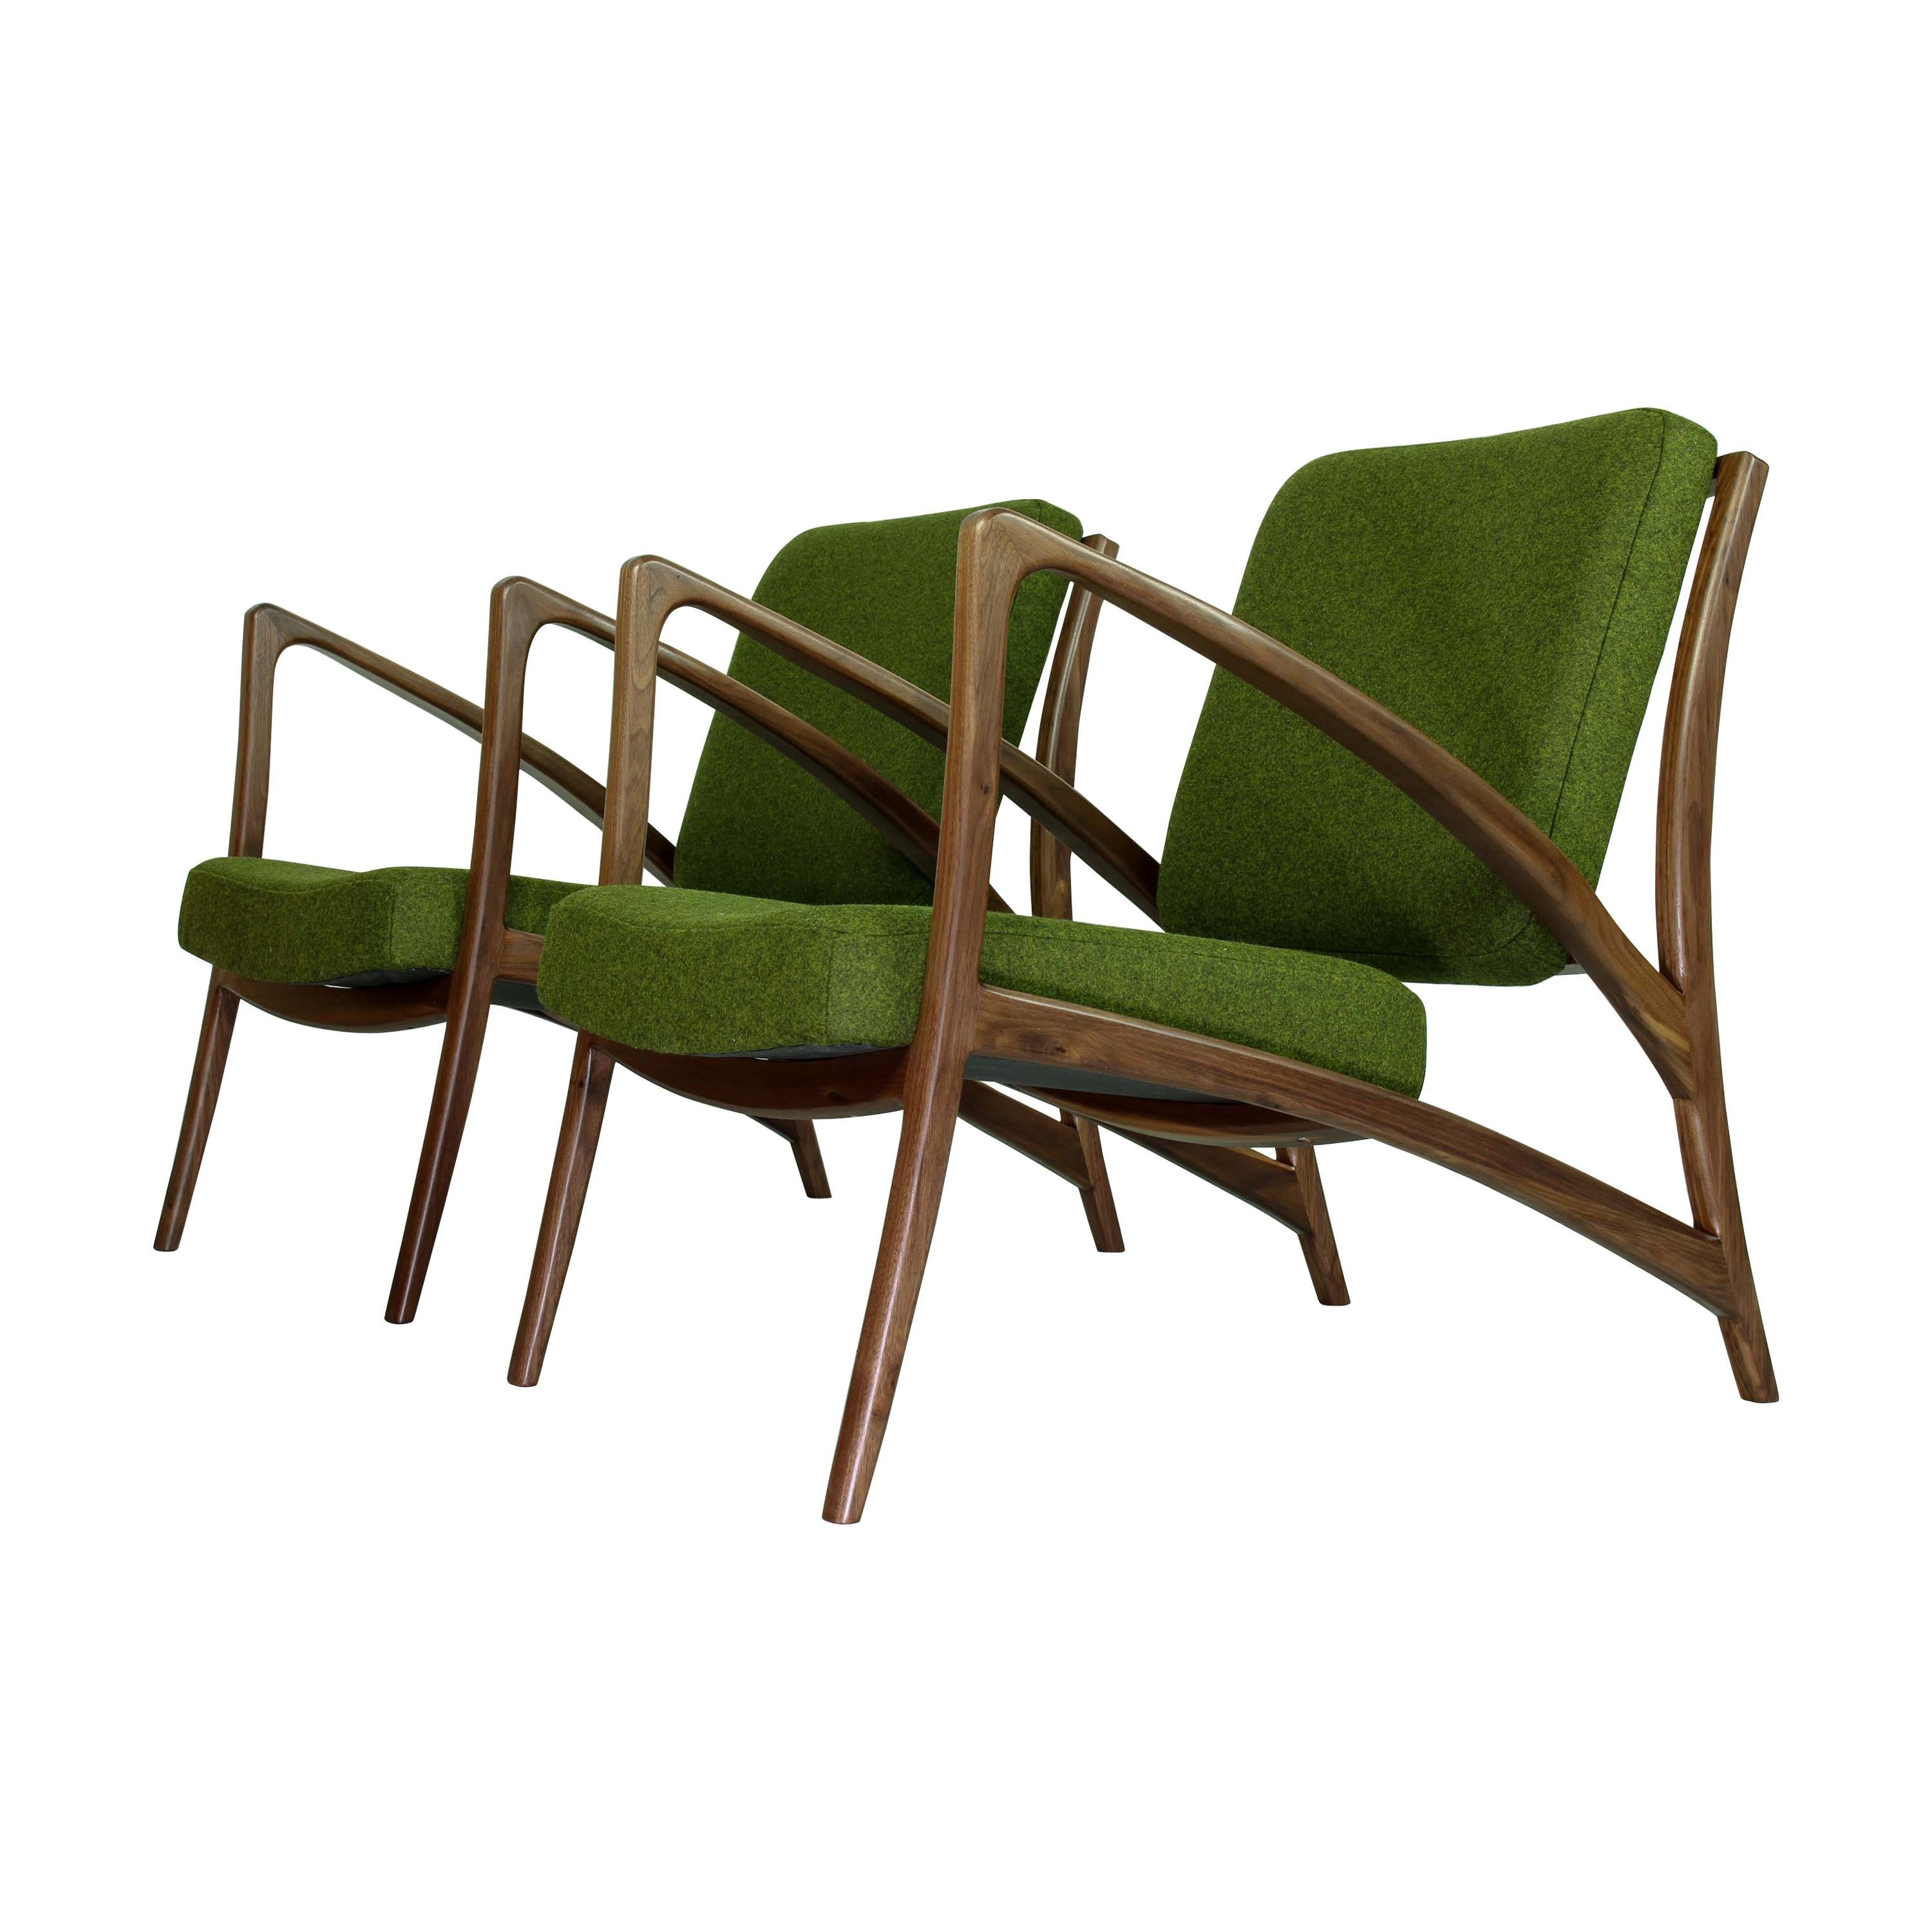 Stunning Curved Sculptural Lounge Chairs Floating Dutch Design For Sale